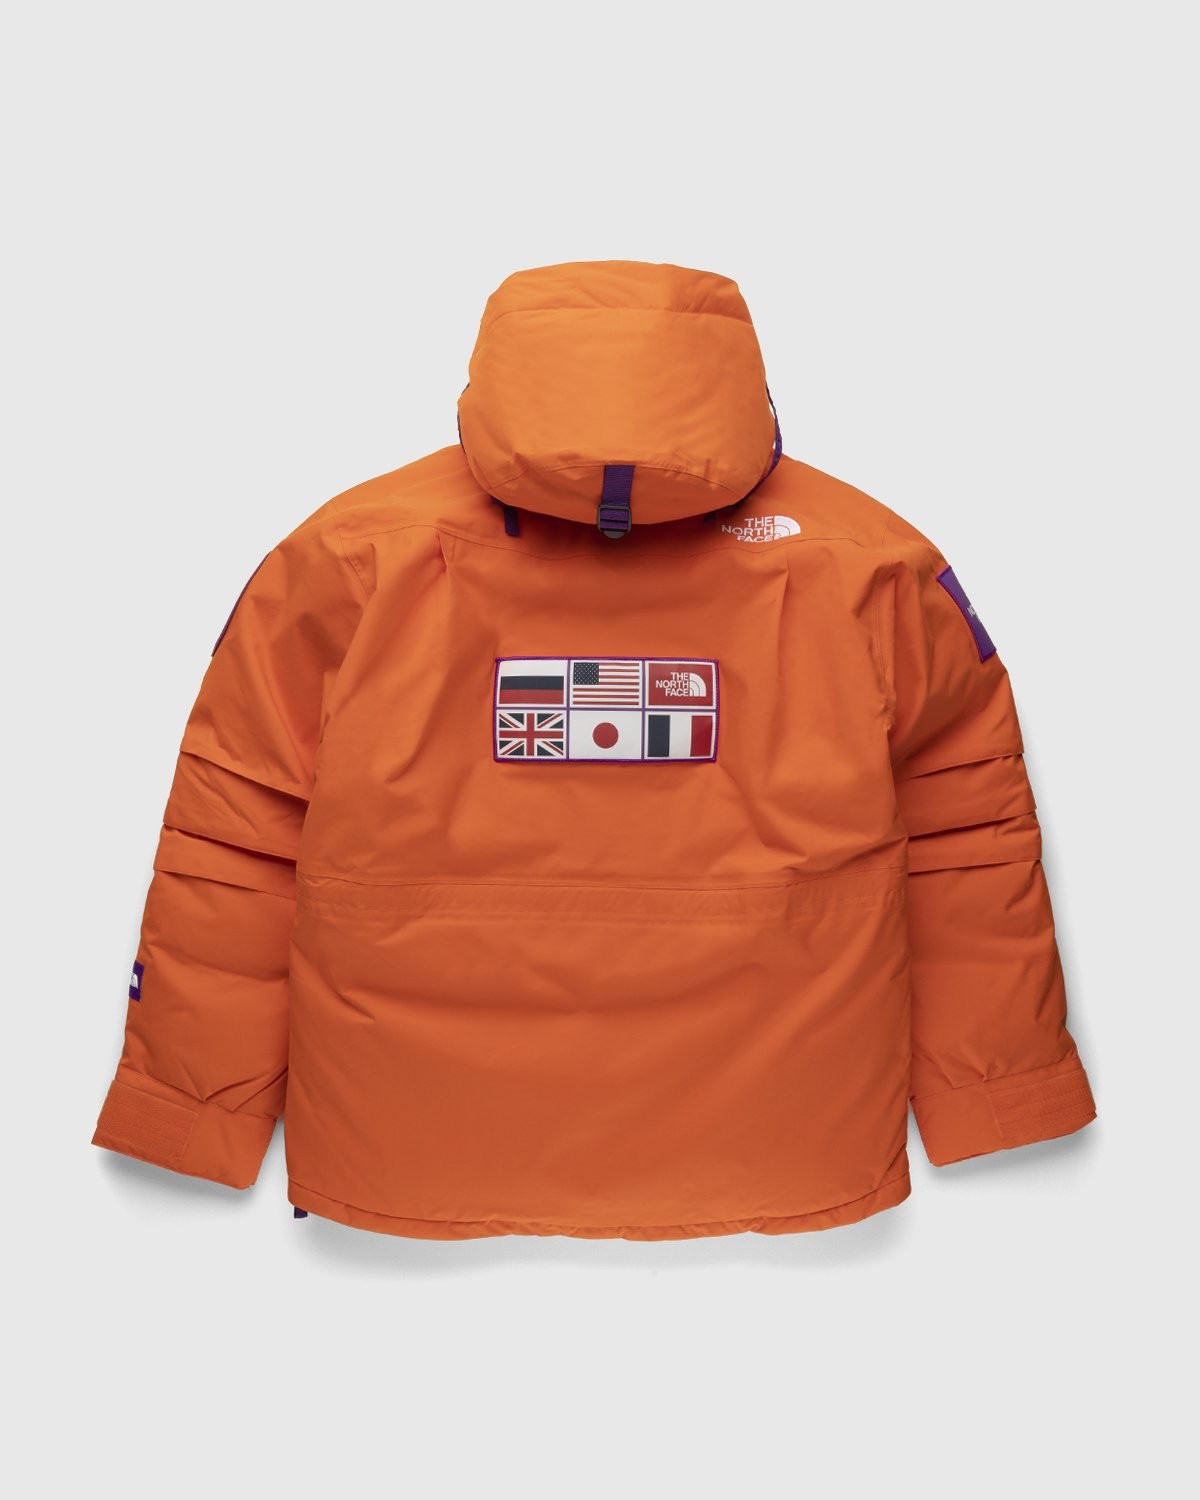 The North Face – Trans Antarctica Expedition Parka Red Orange